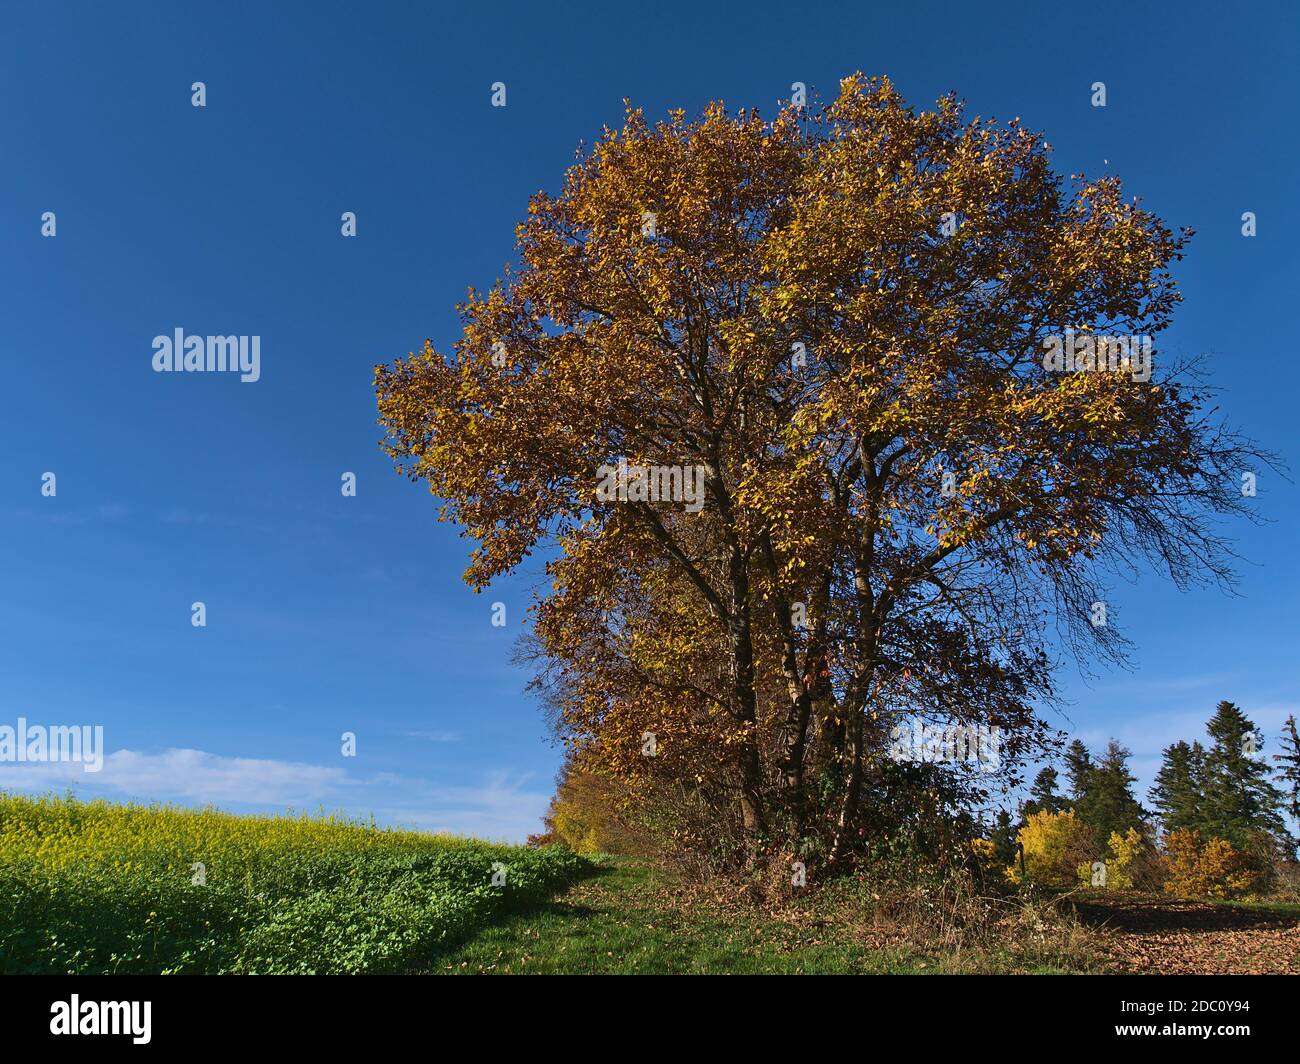 Beautiful trees with discolored orange leaves besides a rapeseed (brassica napus) field with yellow colored blossom in fall season in Black Forest. Stock Photo